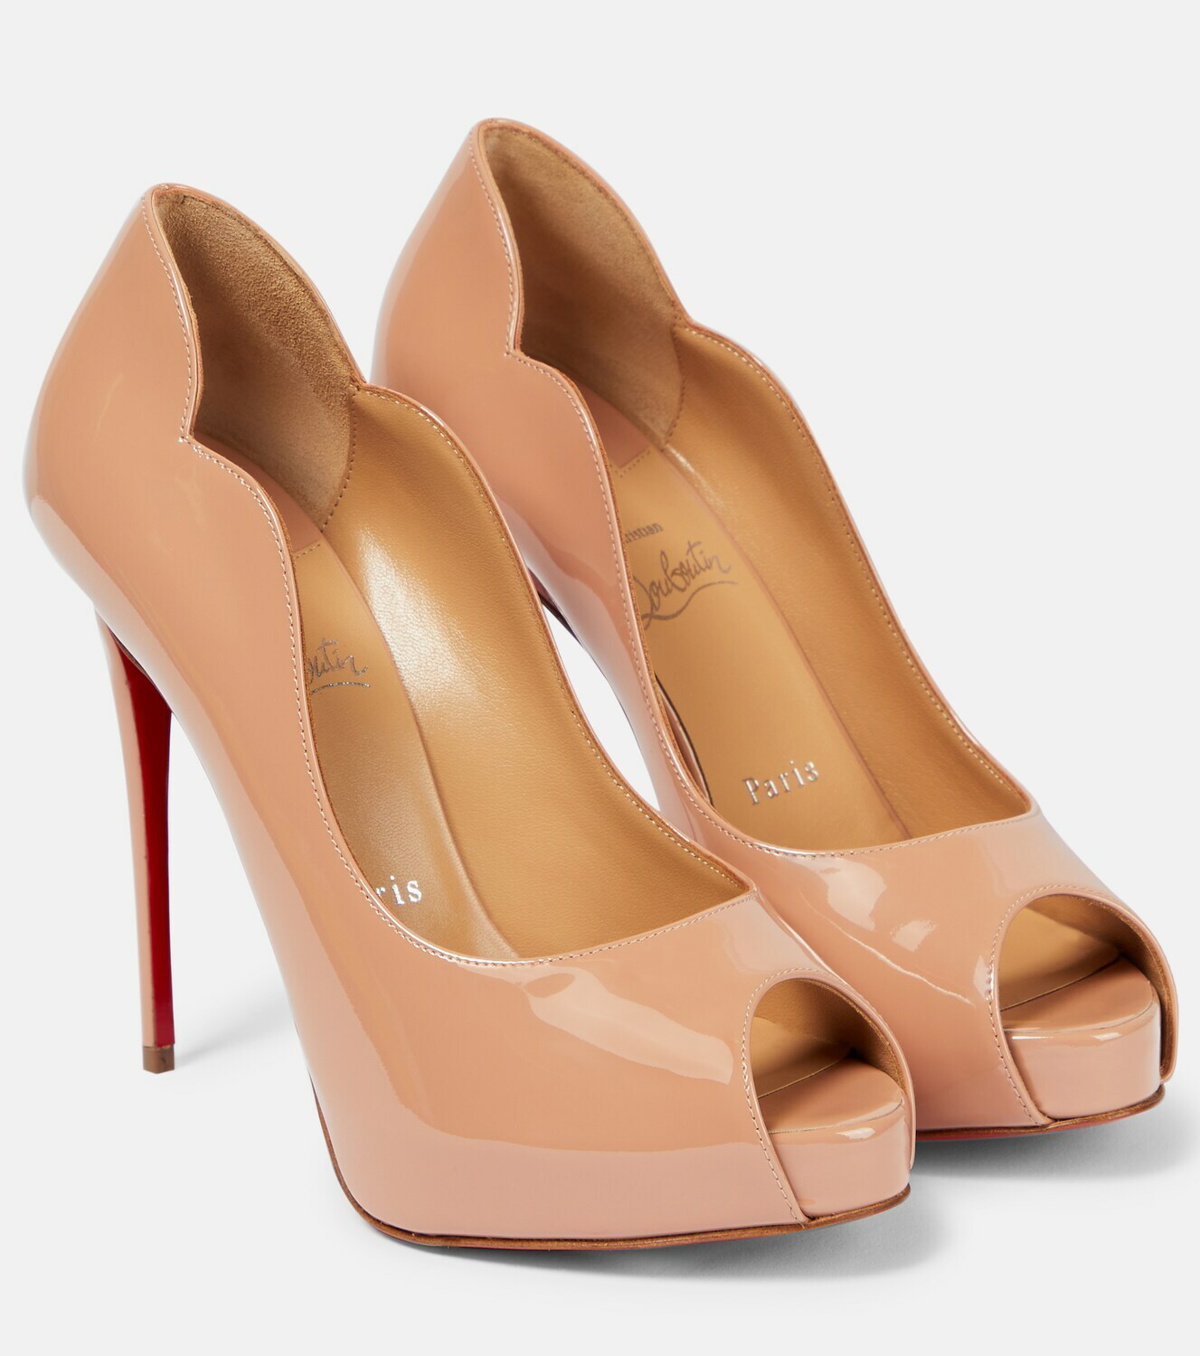 Christian Louboutin Hot Chick 100 Stripe Patent Red Sole Pump Eur 38US 8   eBay